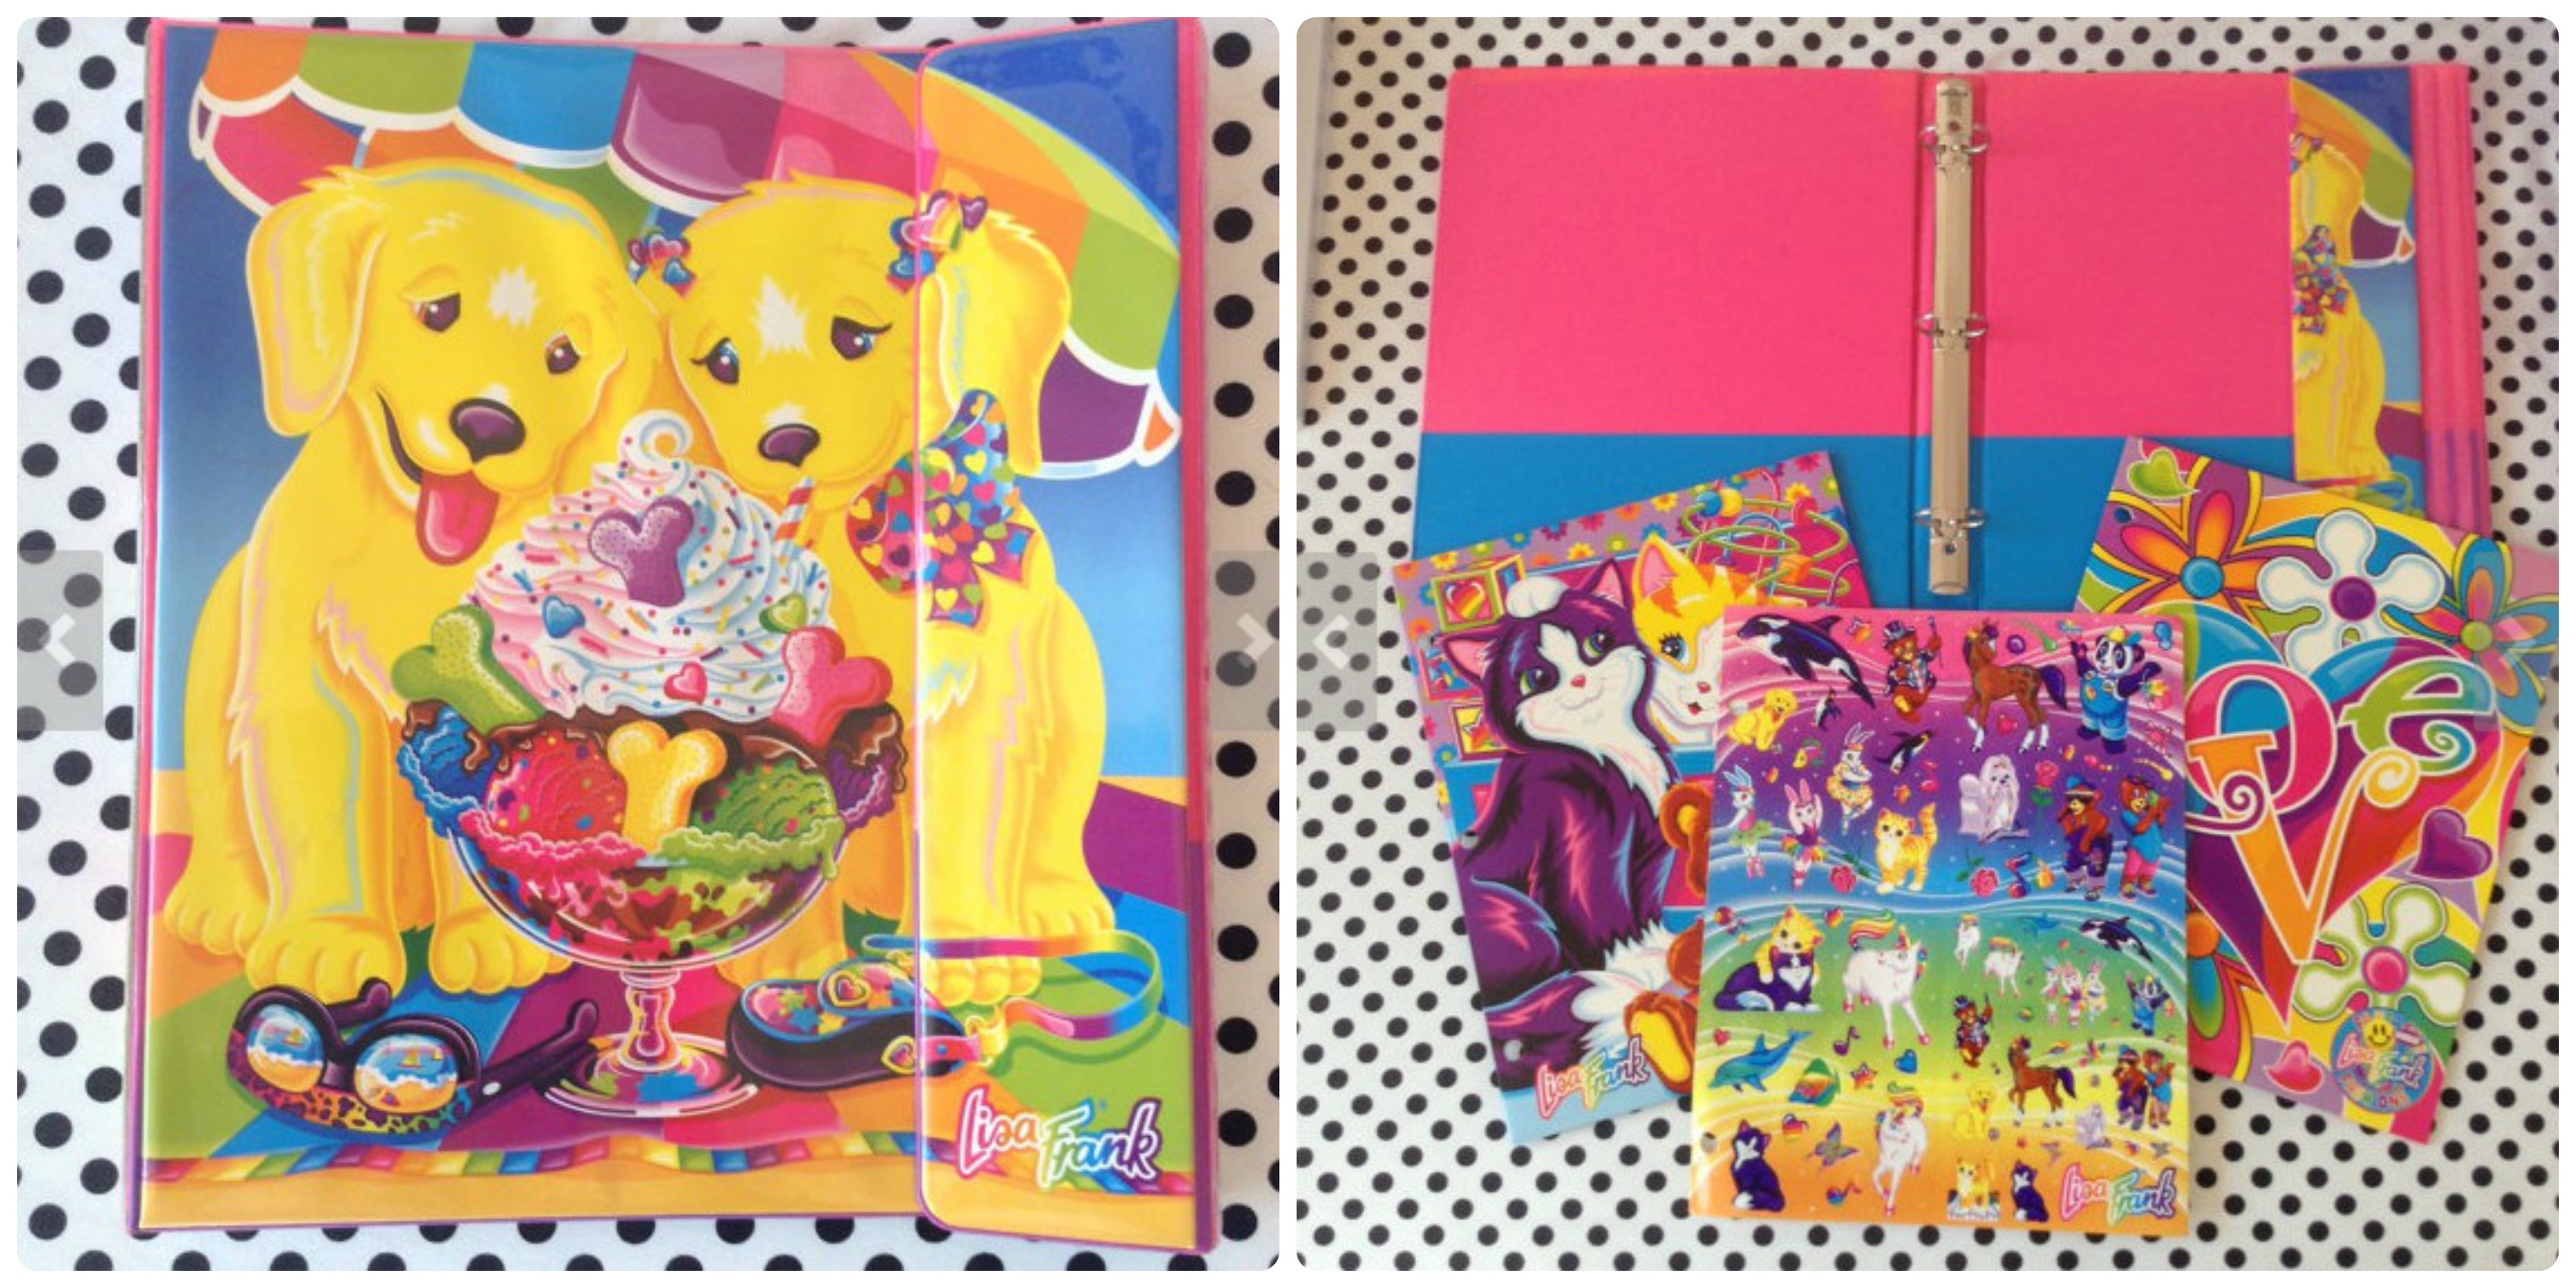 The Lisa Frank trapper keeper I bought!